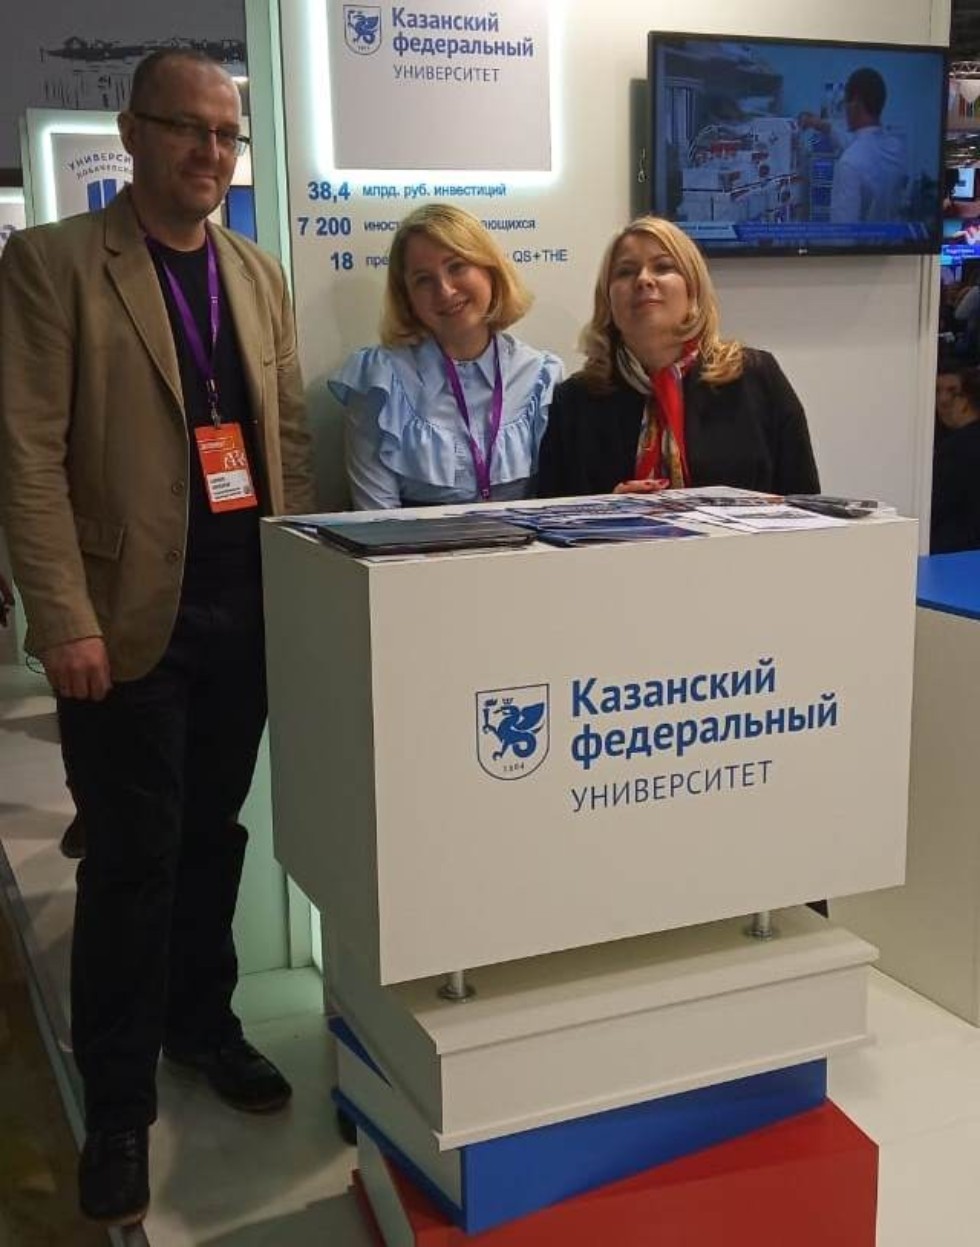 Kazan University promoted at Moscow International Education Fair ,Government of Russia, Ministry of Science and Higher Education of Russia, Ministry of Enlightenment of Russia